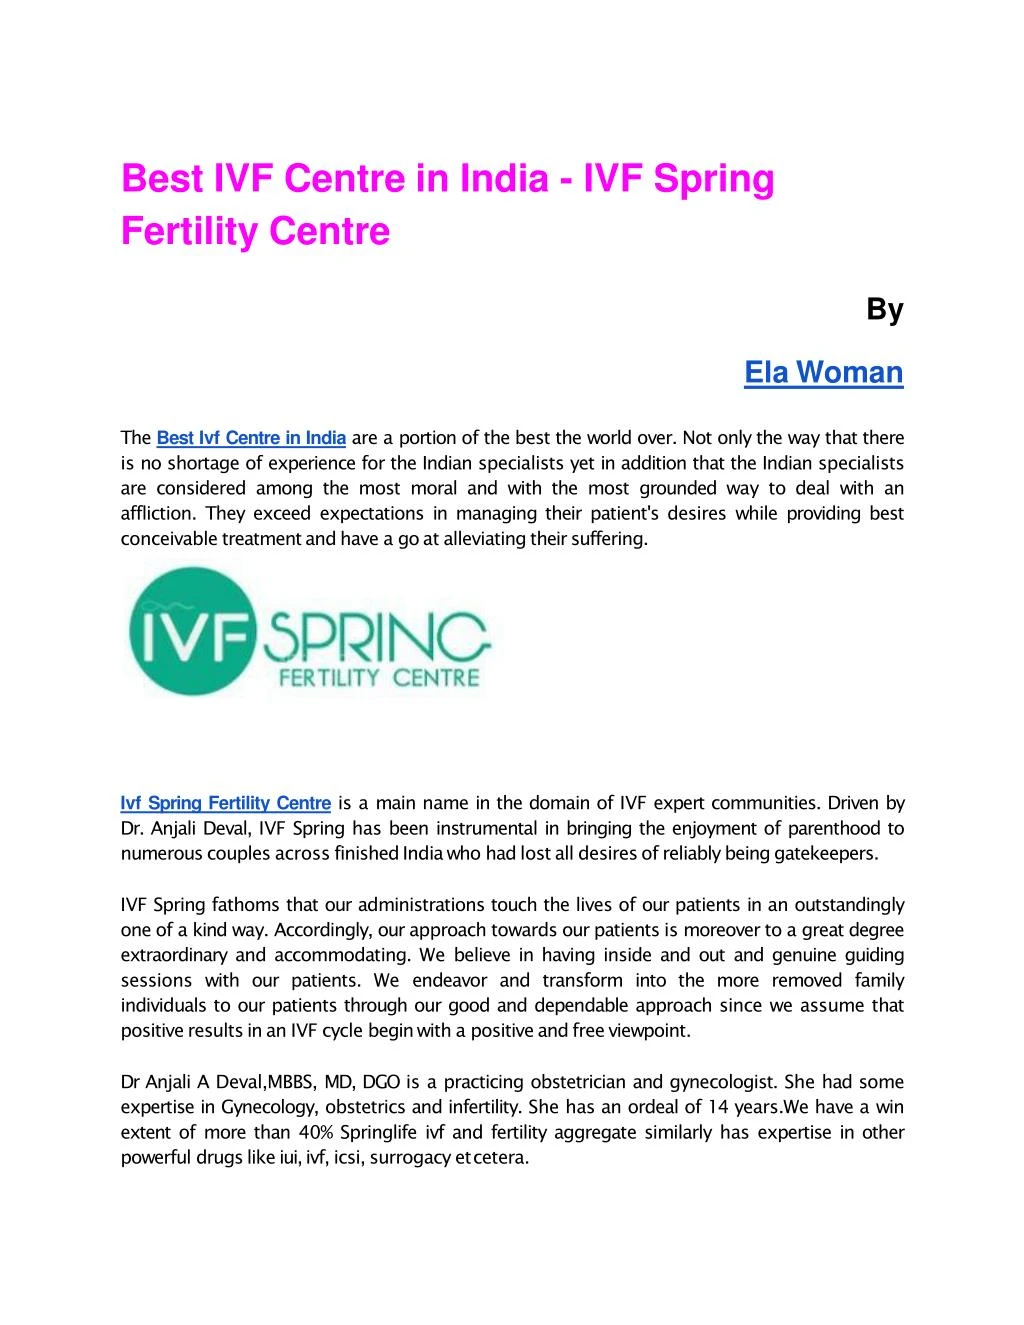 best ivf centre in india ivf spring fertility